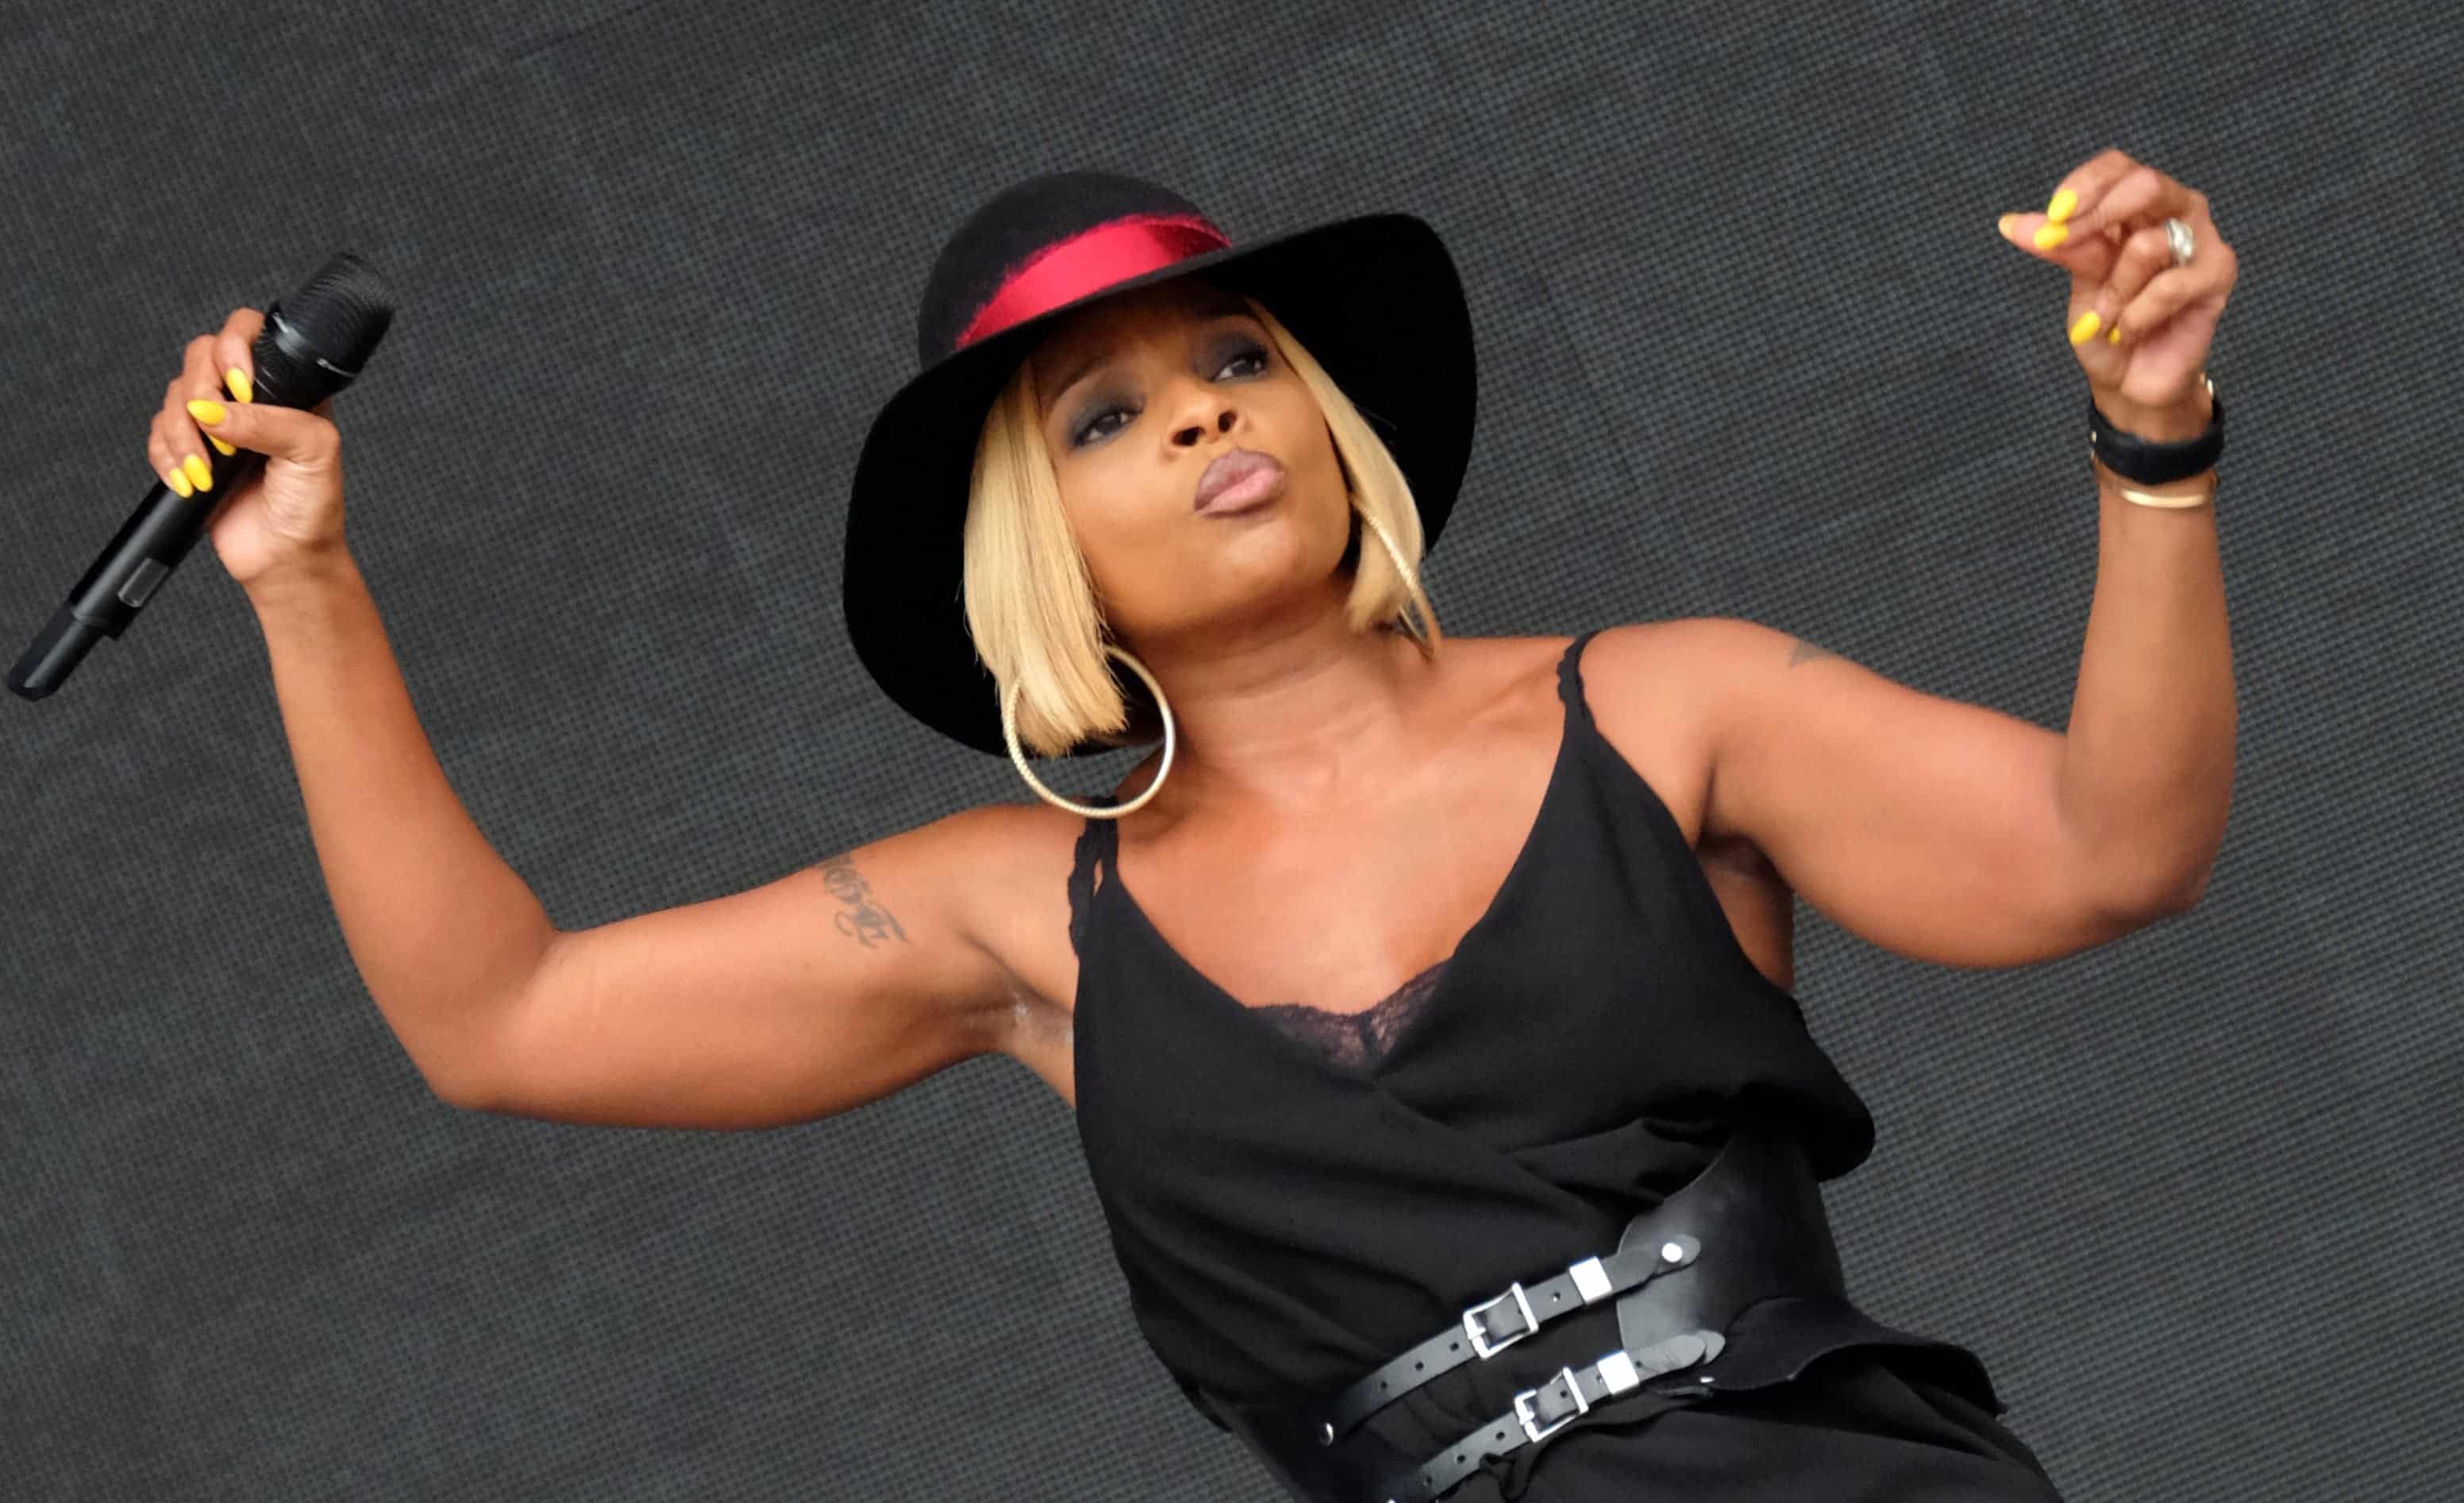 Whoa, Mary J. Blige's Abs Are Crazy Toned In The Most Fab Gucci Crop Top